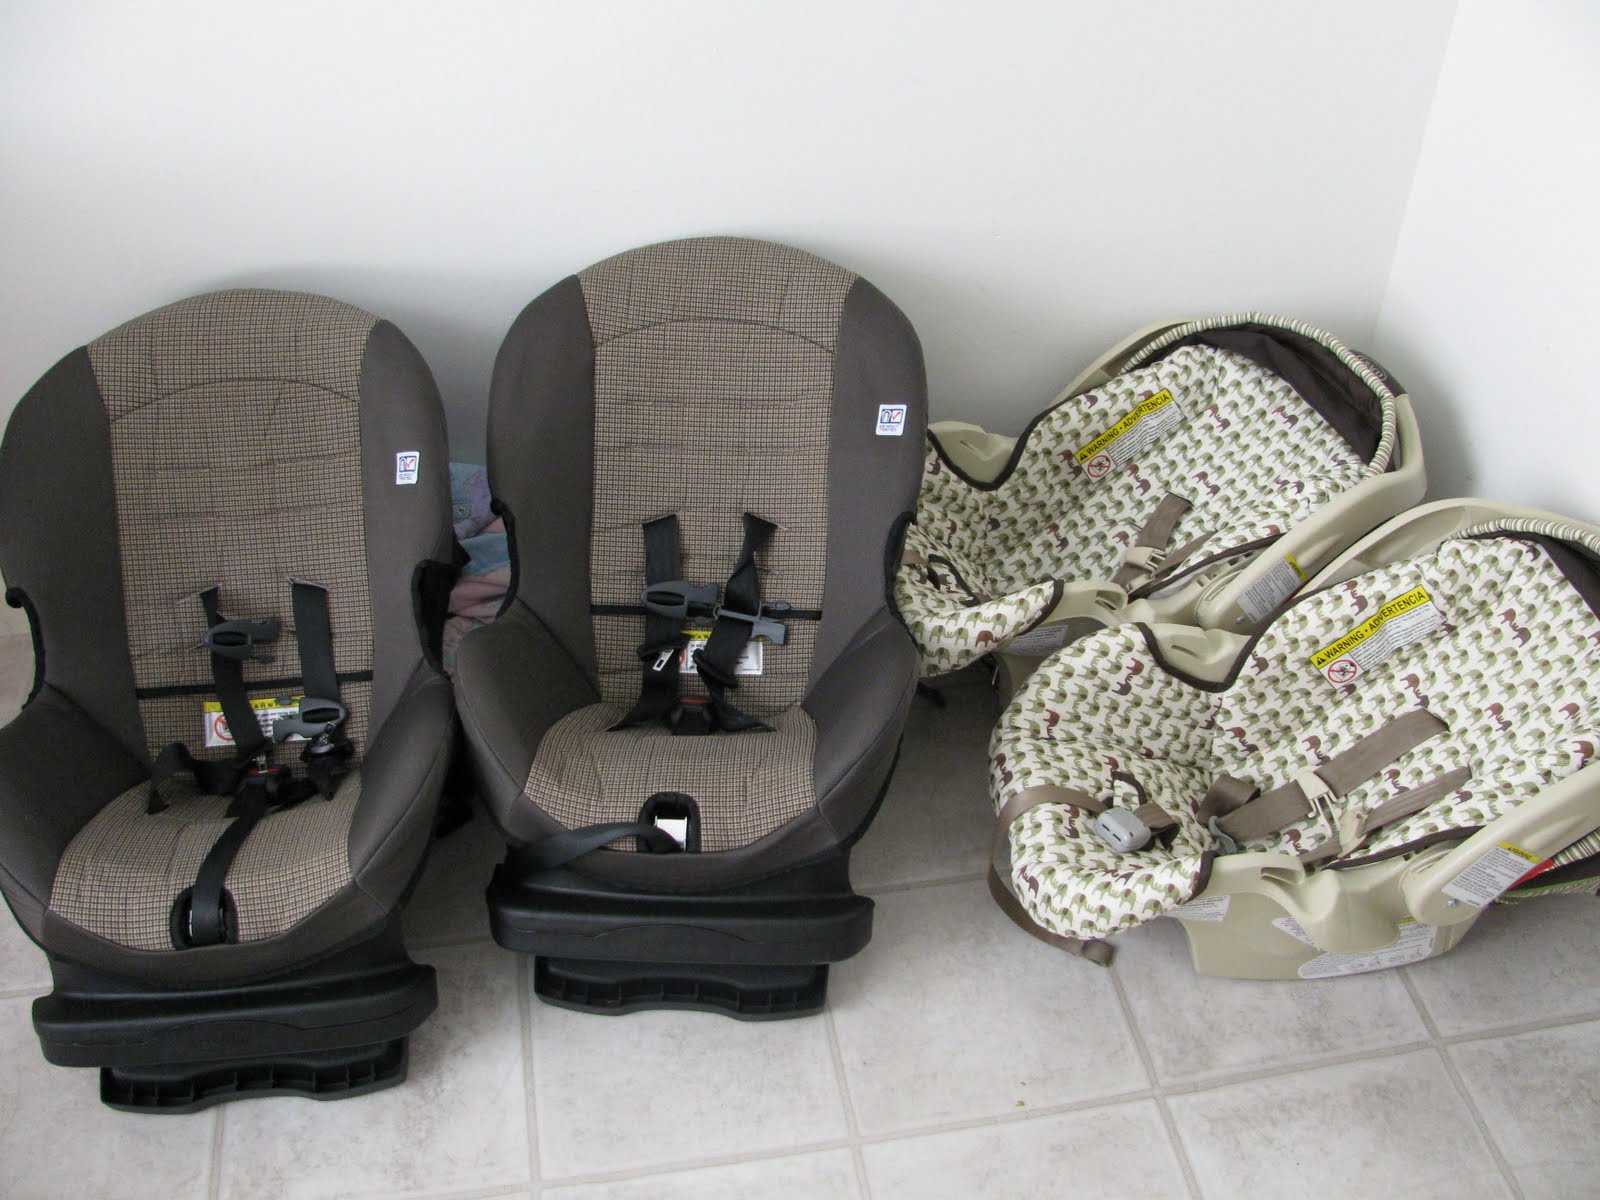 How To Get Free Car Seats My, Does Wic Give Out Free Car Seats